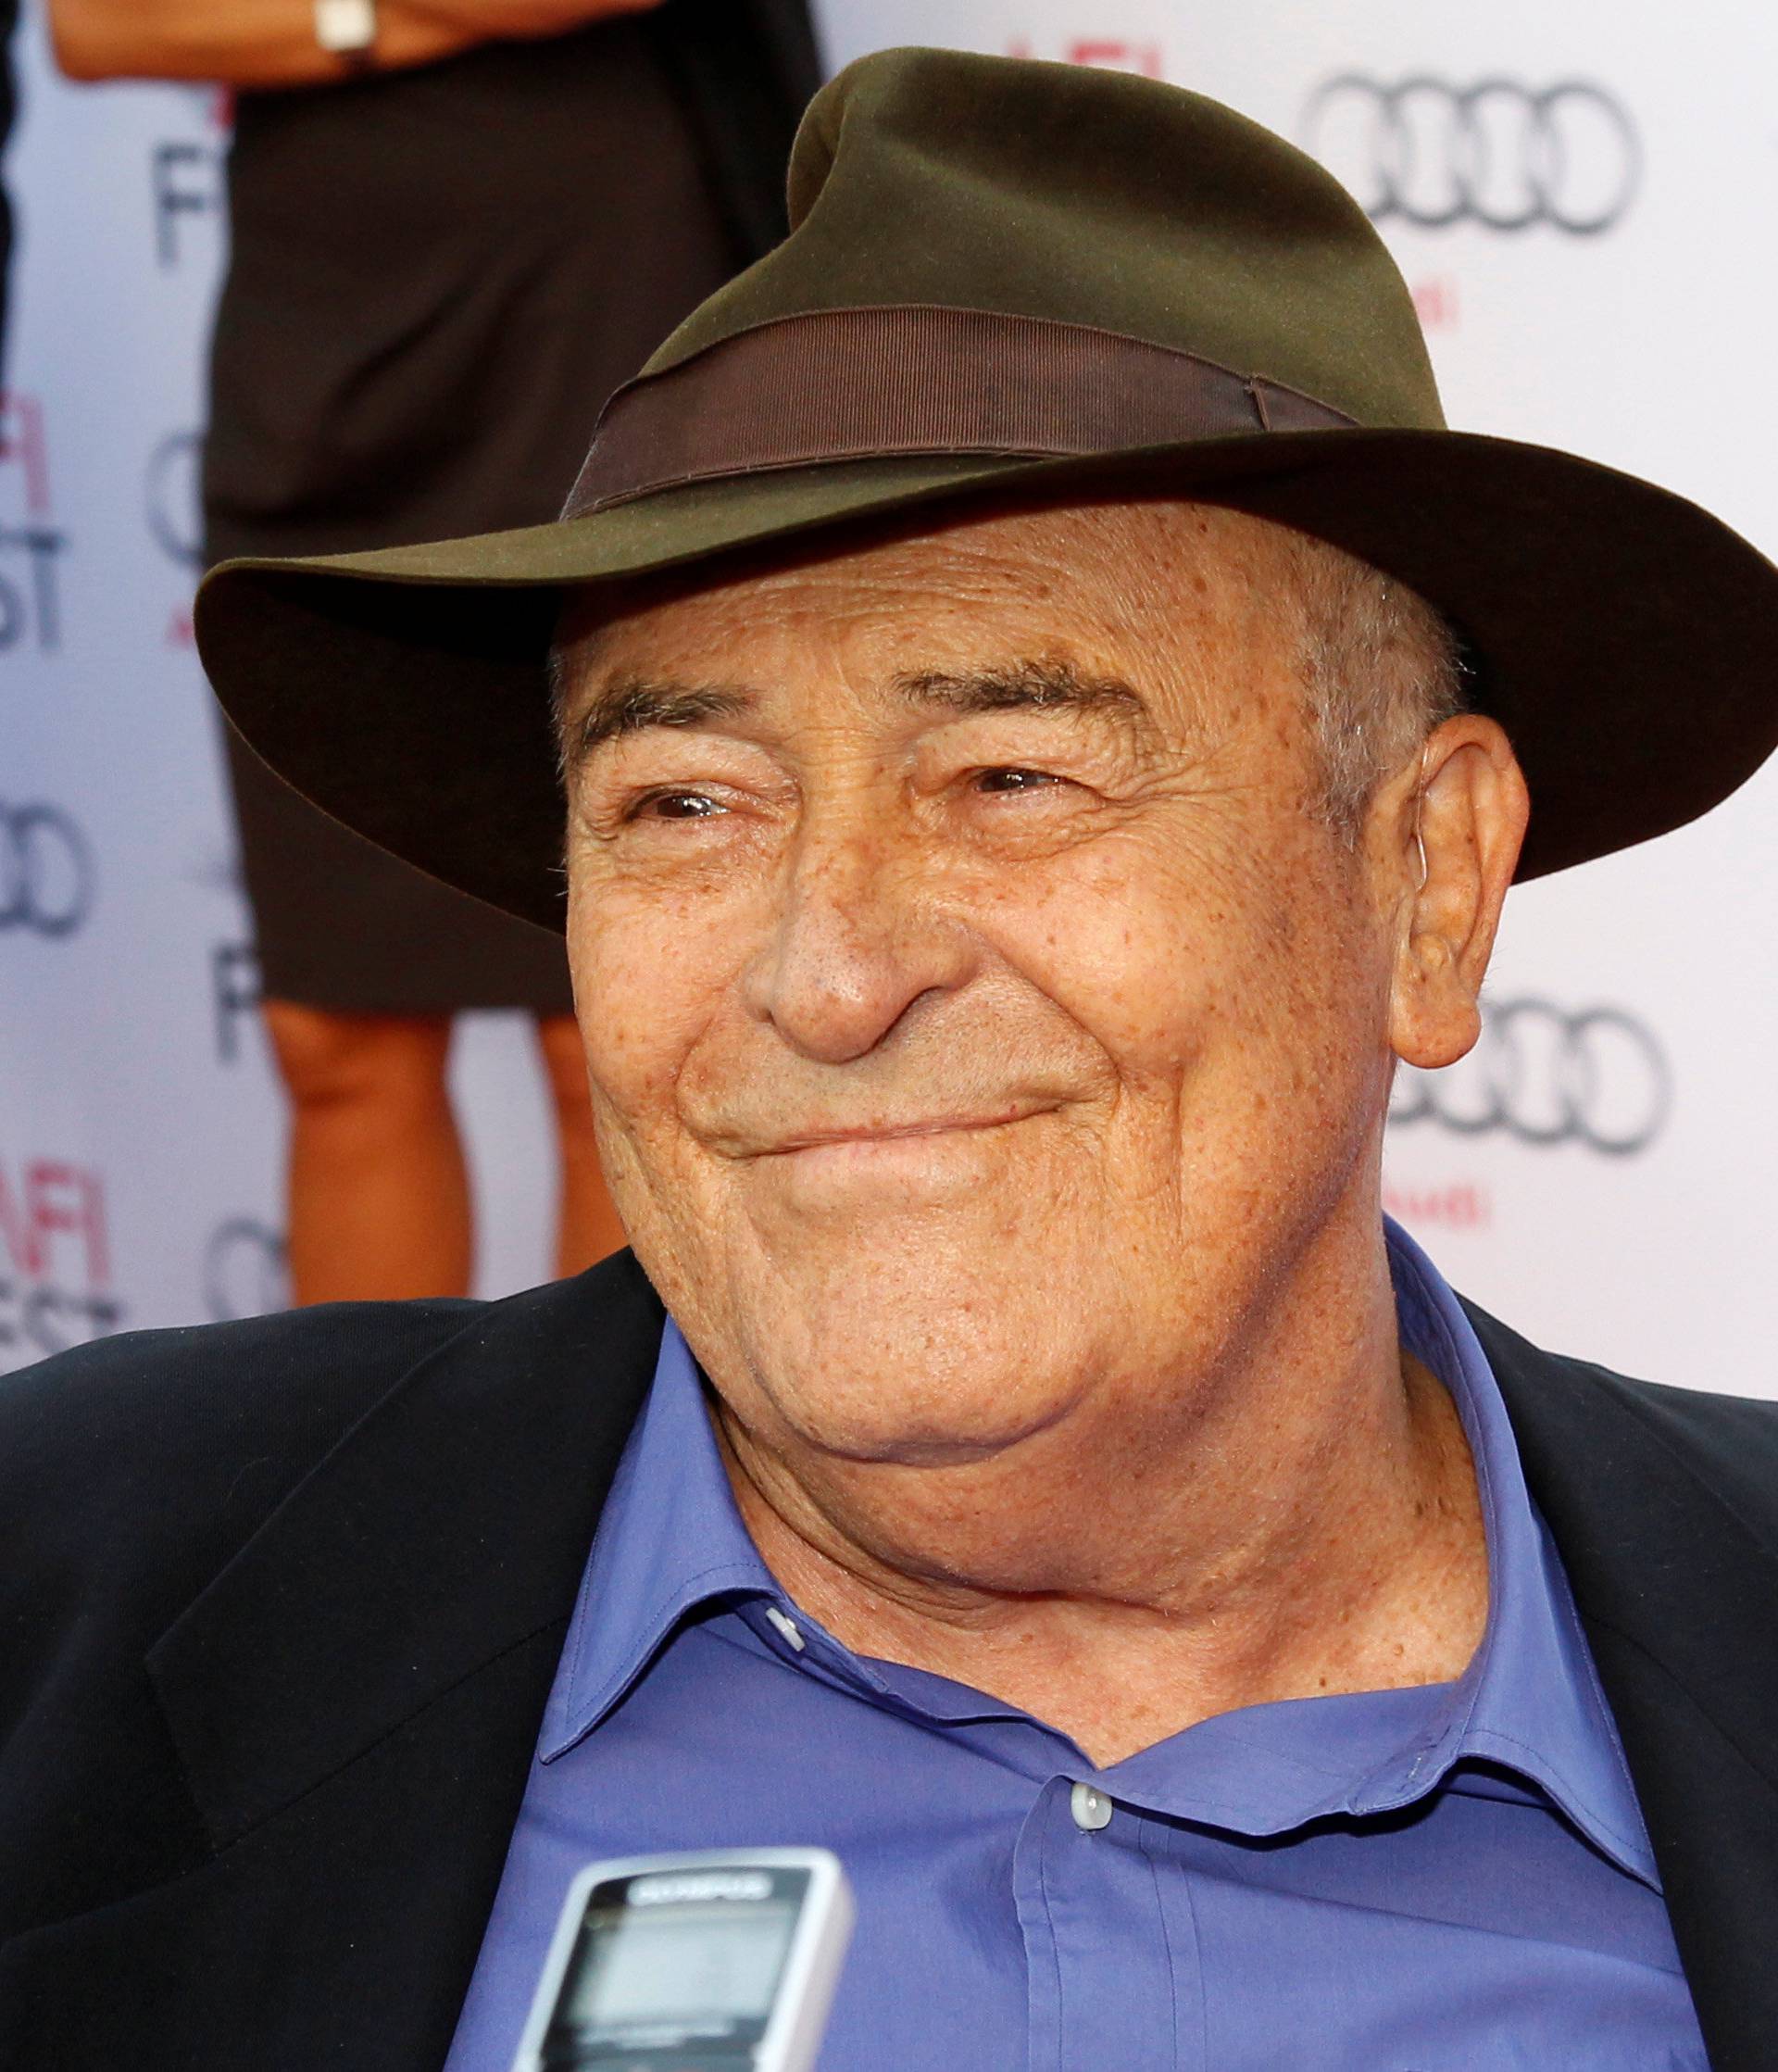 FILE PHOTO: Bertolucci is interviewed as he arrives for a gala screening of "The Last Emperor" in 3D at the AFI Fest 2013 in Hollywood